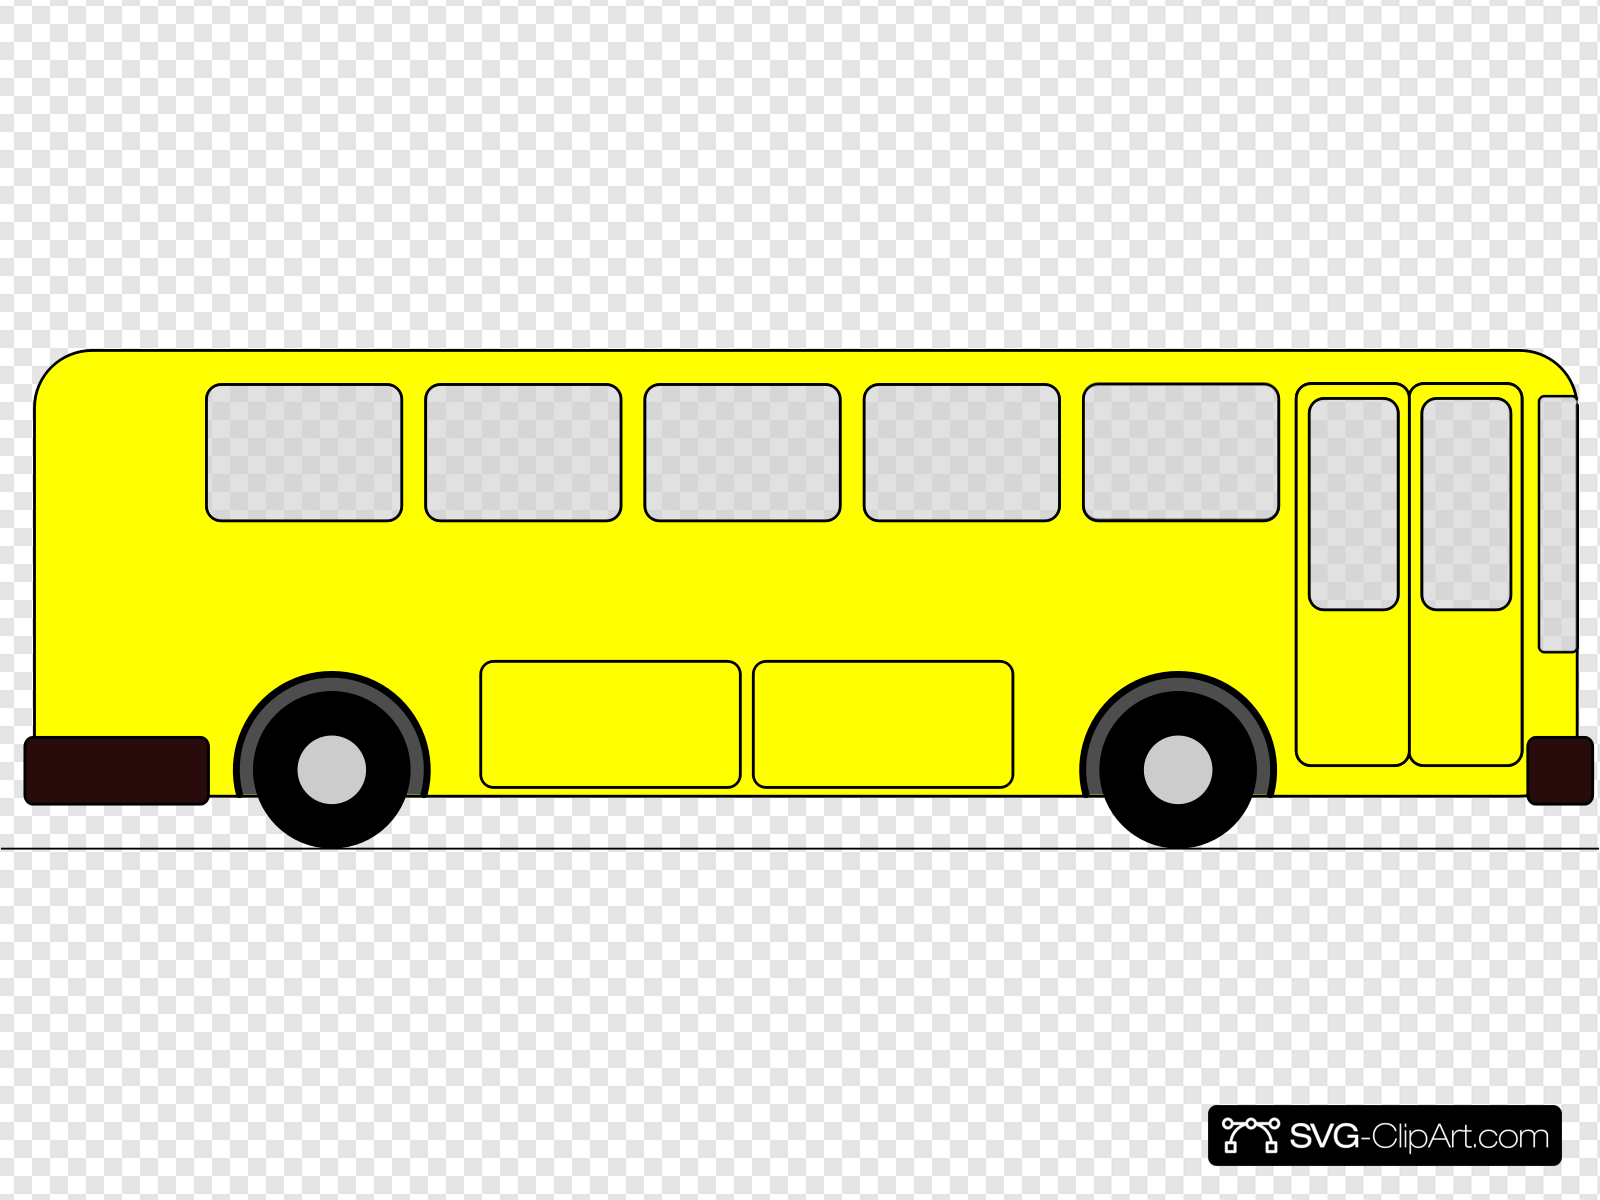 Yellow Bus Clip art, Icon and SVG.